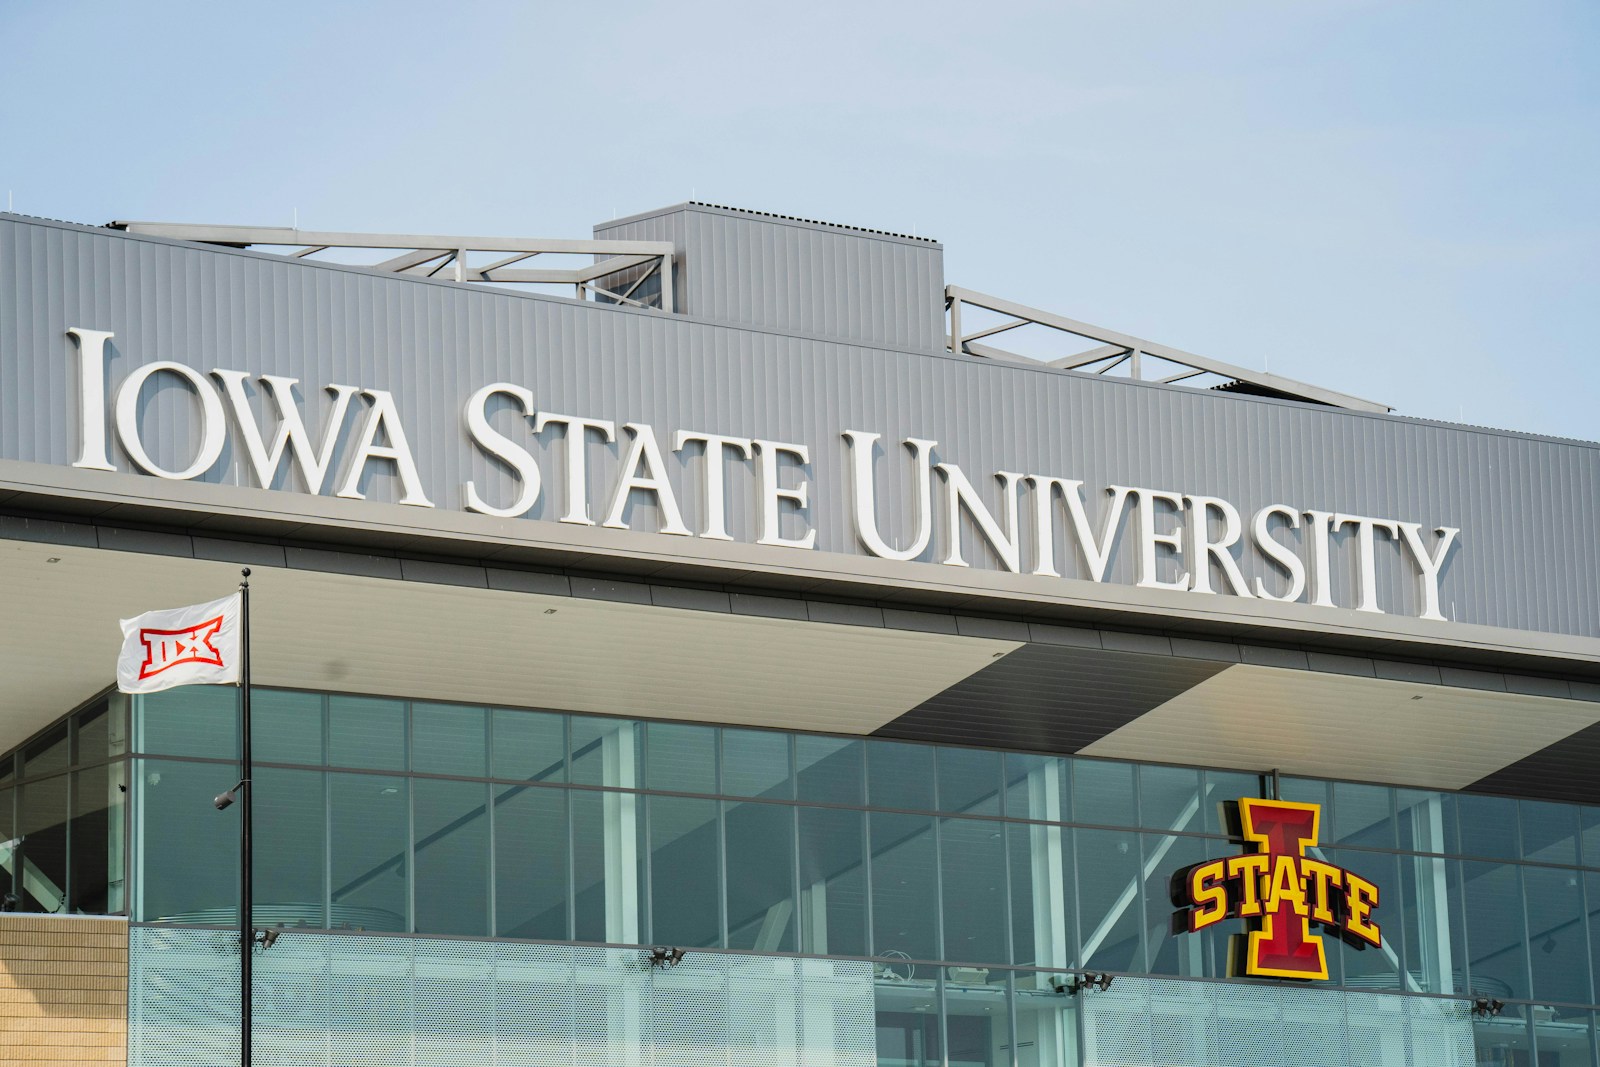 the iowa state university sign on top of a building